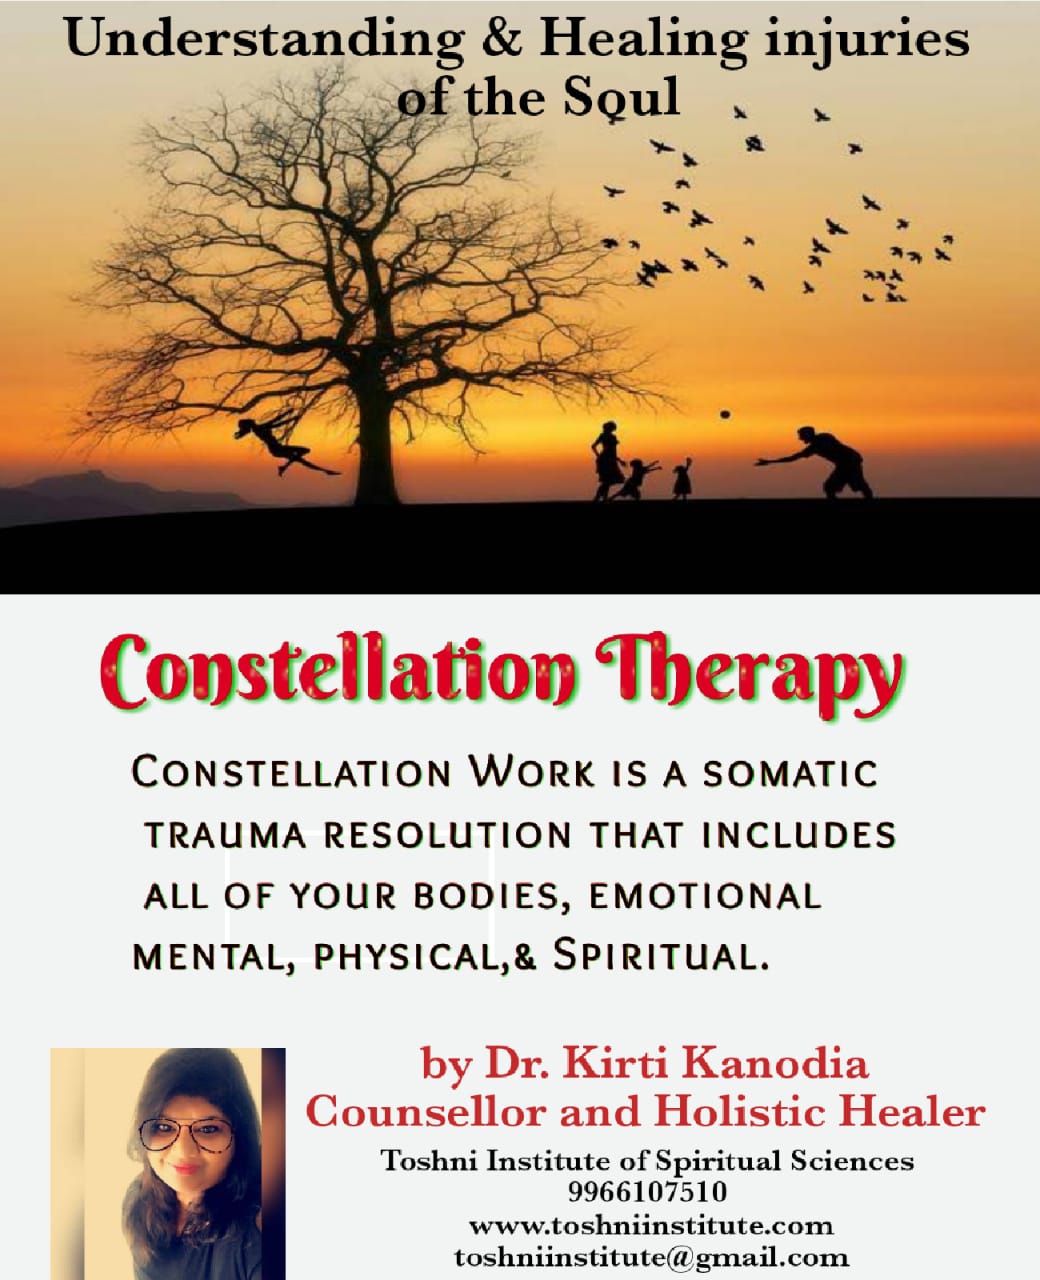 Family Constellations by Dr. Kirti Kanodia - Raipur